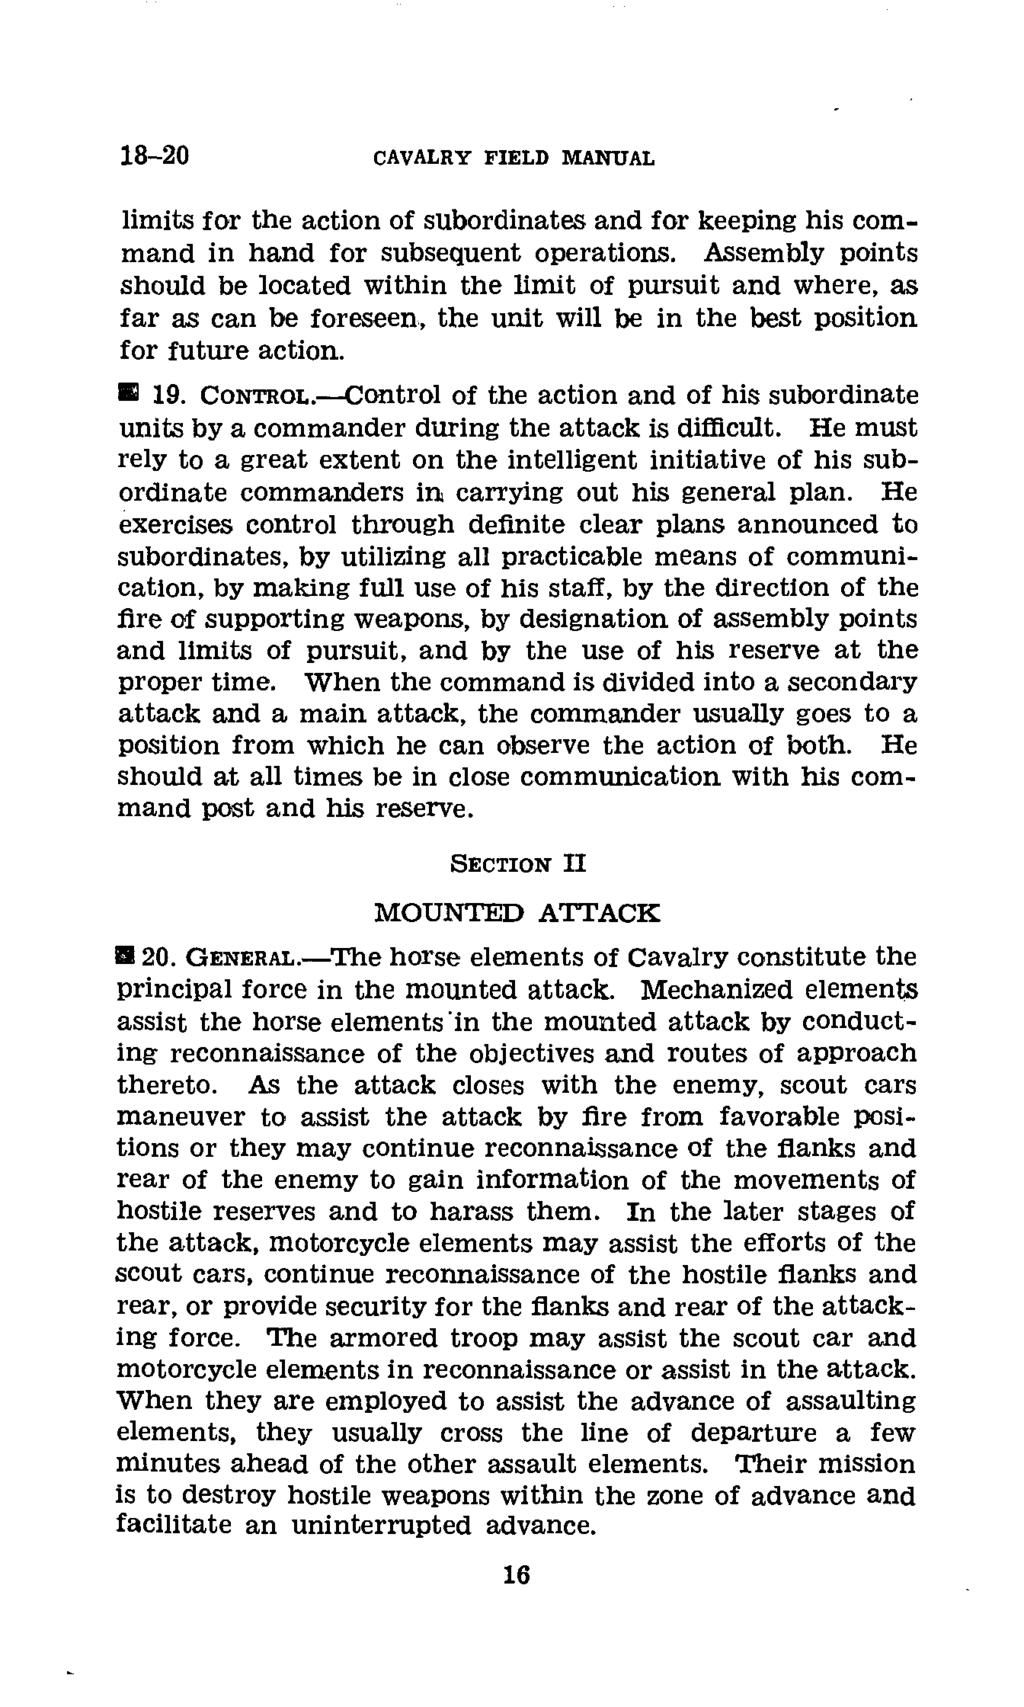 18-20 CAVALRY FIELD MANUAL limits for the action of subordinates and for keeping his command in hand for subsequent operations.